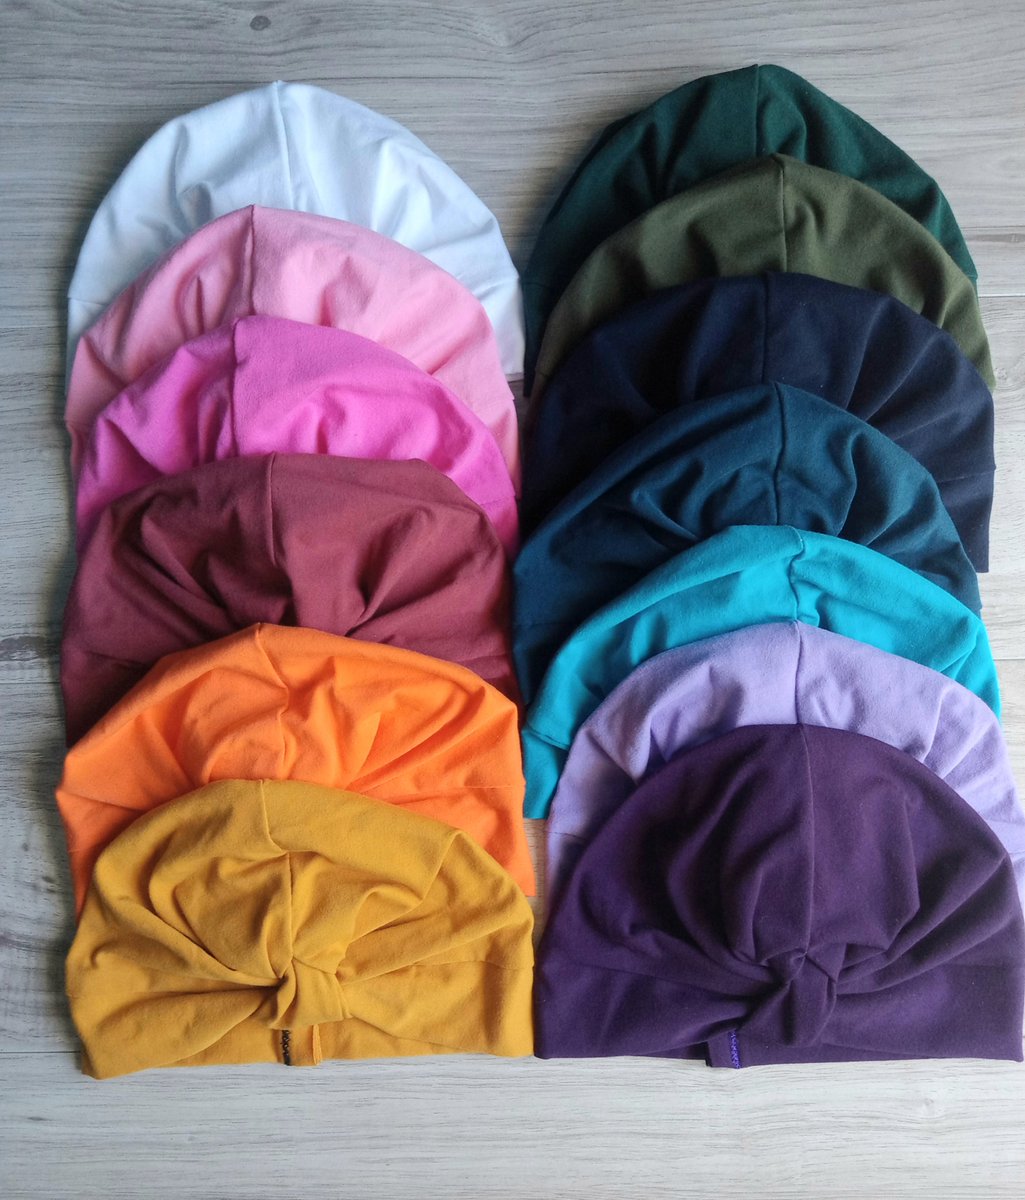 Our Turbans Are Soft Stretchy And Strong. They Won't Quit On Yah Like Those Polyester Wanna Bes Shop The Link Below underthsun.store Get Yours